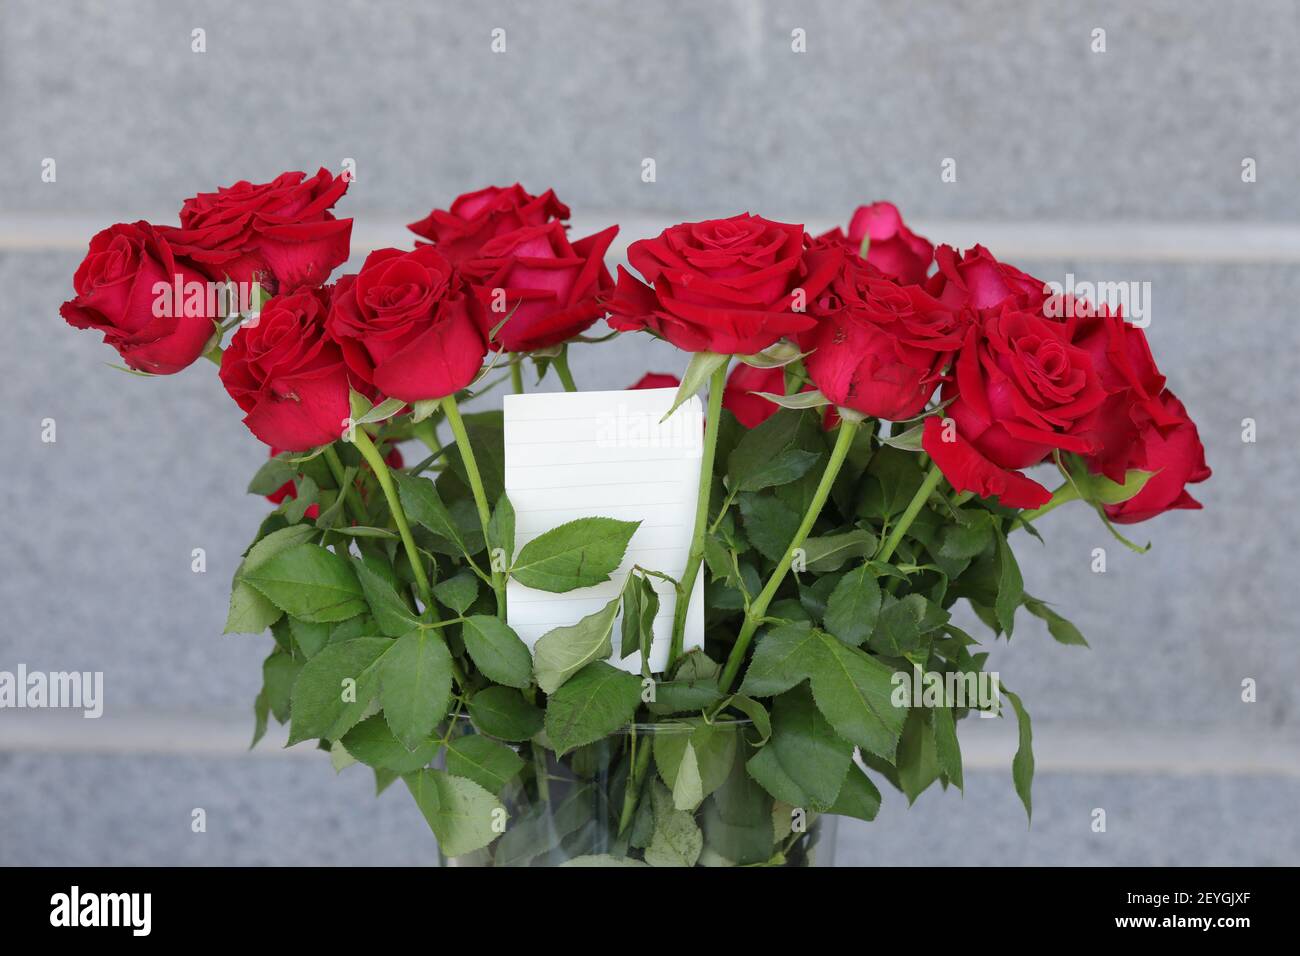 Bouquet of red roses in a vase and a white note for writing a greeting. Stock Photo